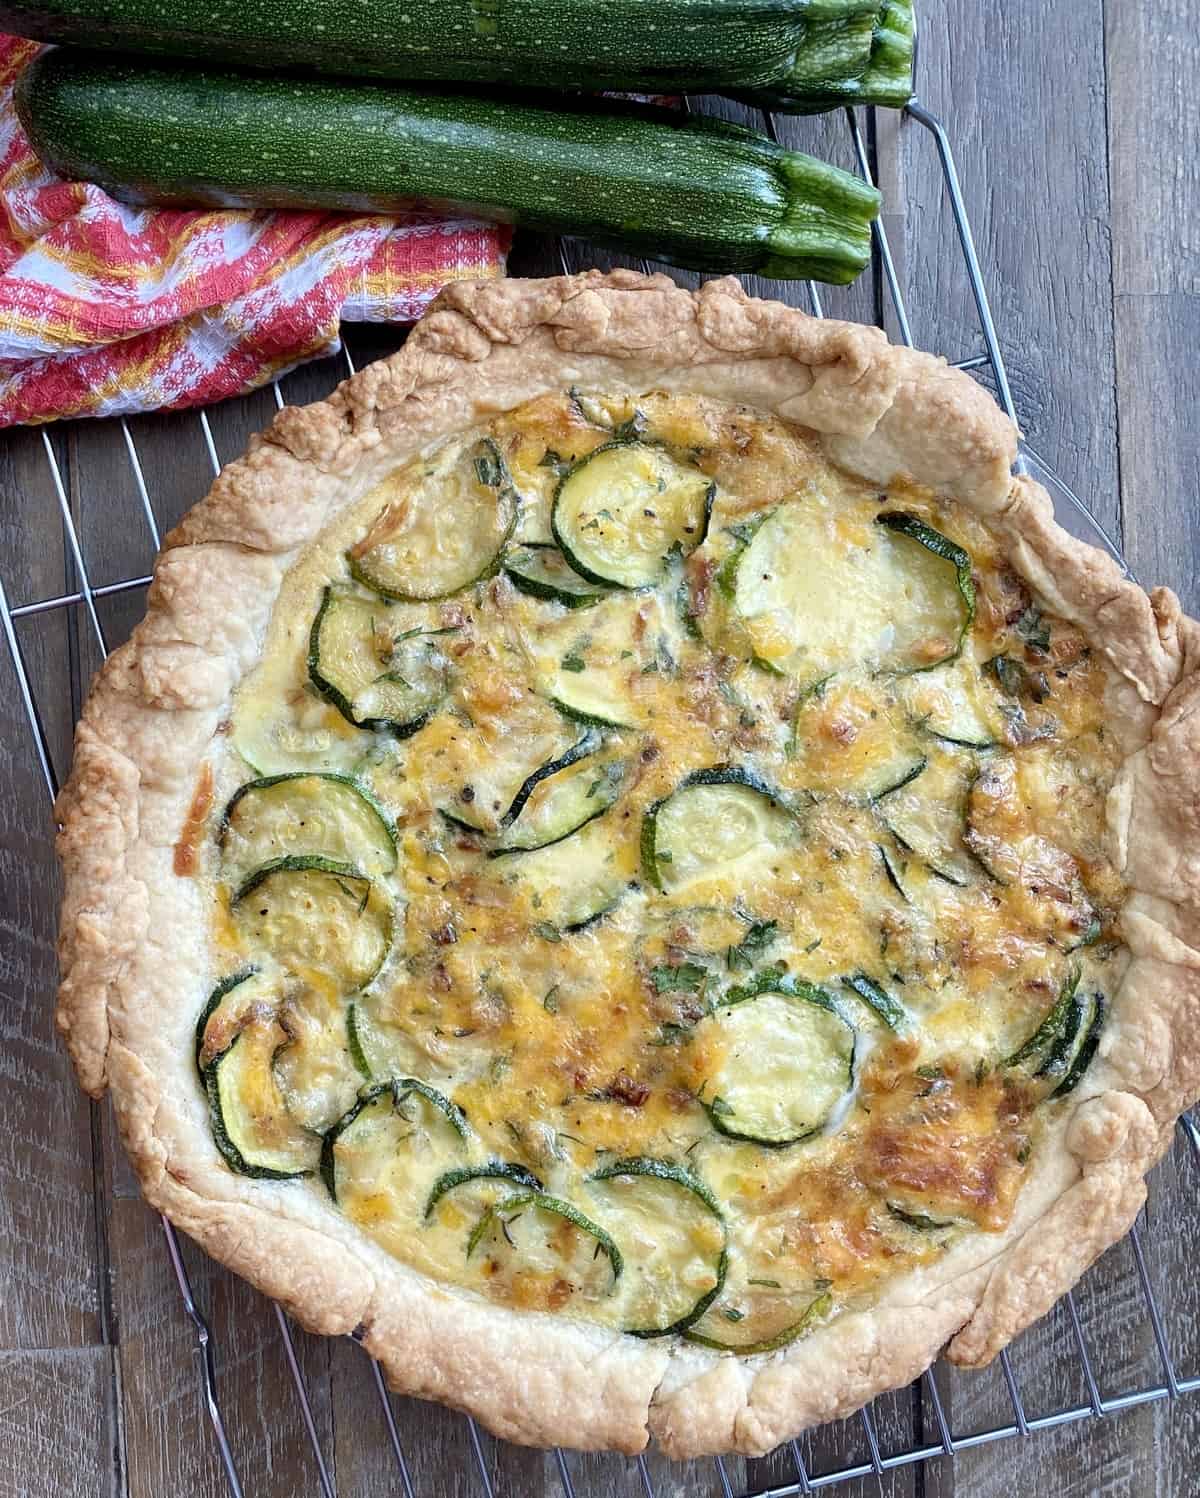 a savory pie made with zucchini